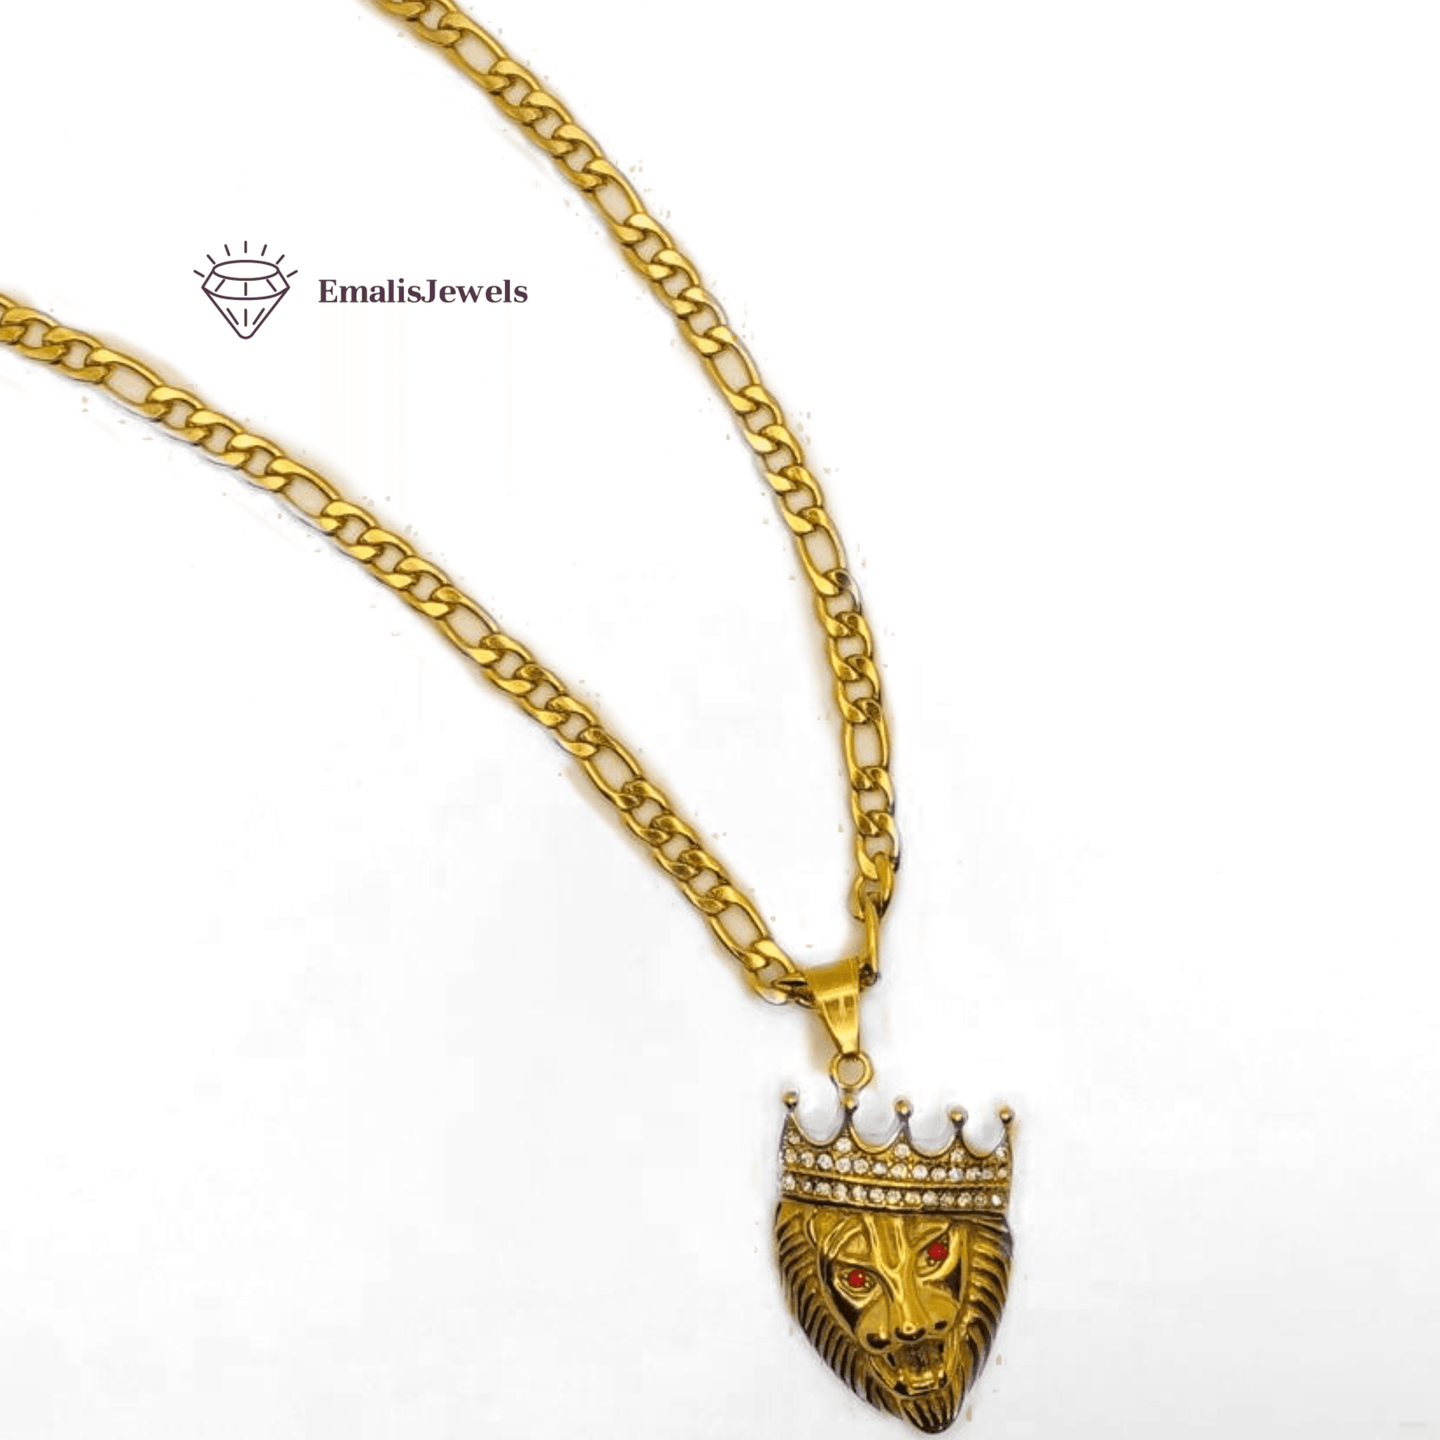 Stainless Steel Chain Necklace and Stainless Steel Gold Overlay King Lion Pendant - PremiumBrandGoods